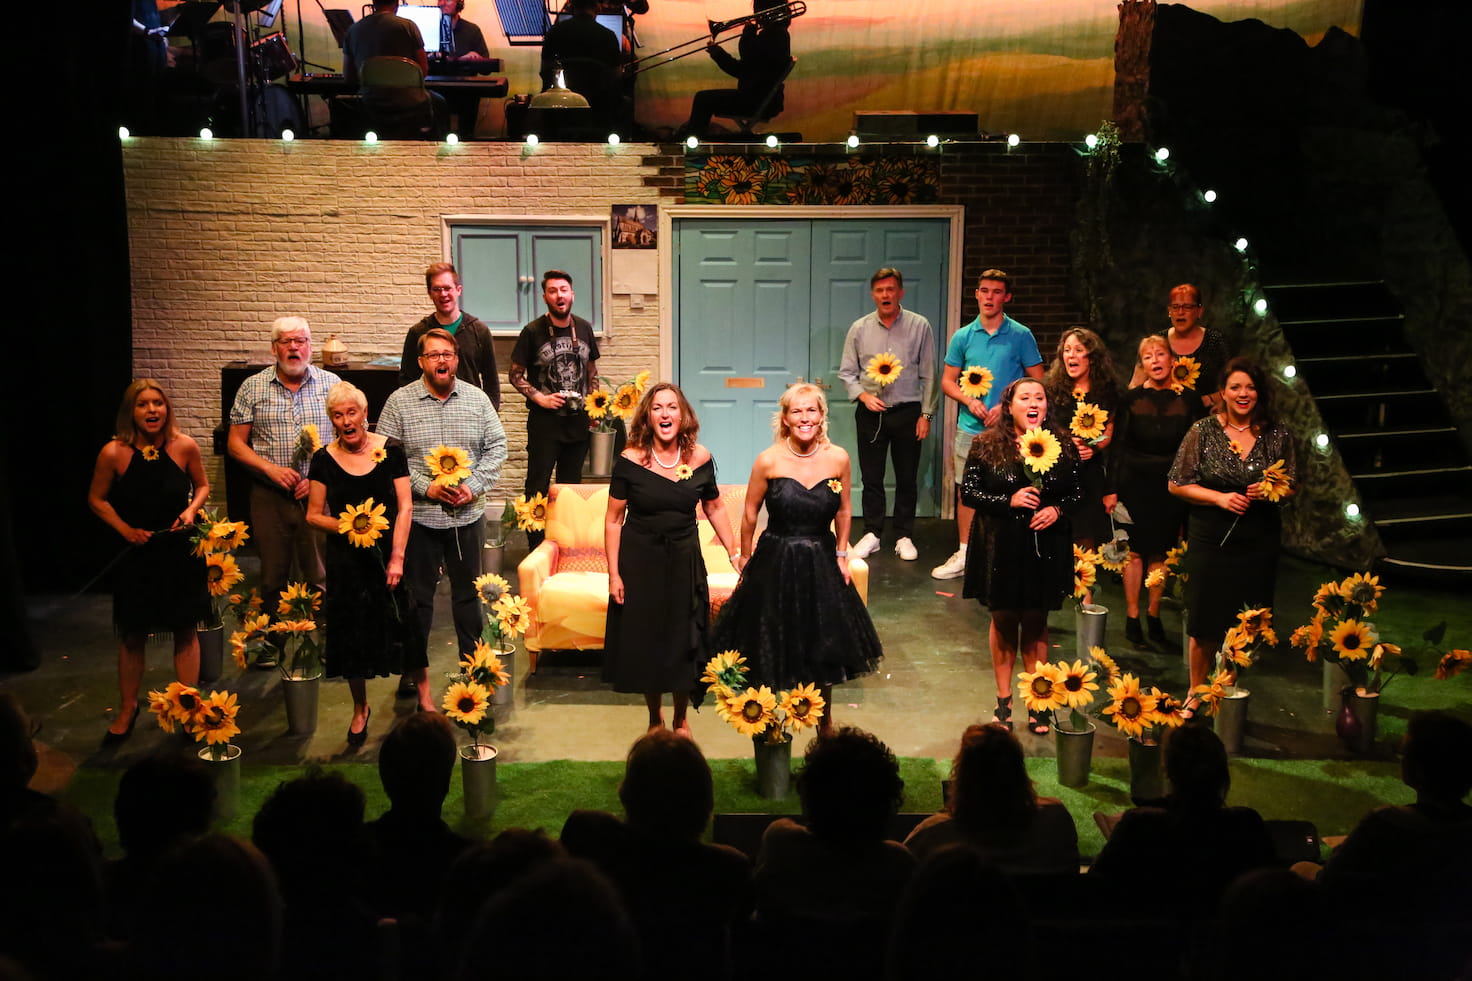 The cast on stage surrounded by sunflowers during the final scene, taken during one of the performances.